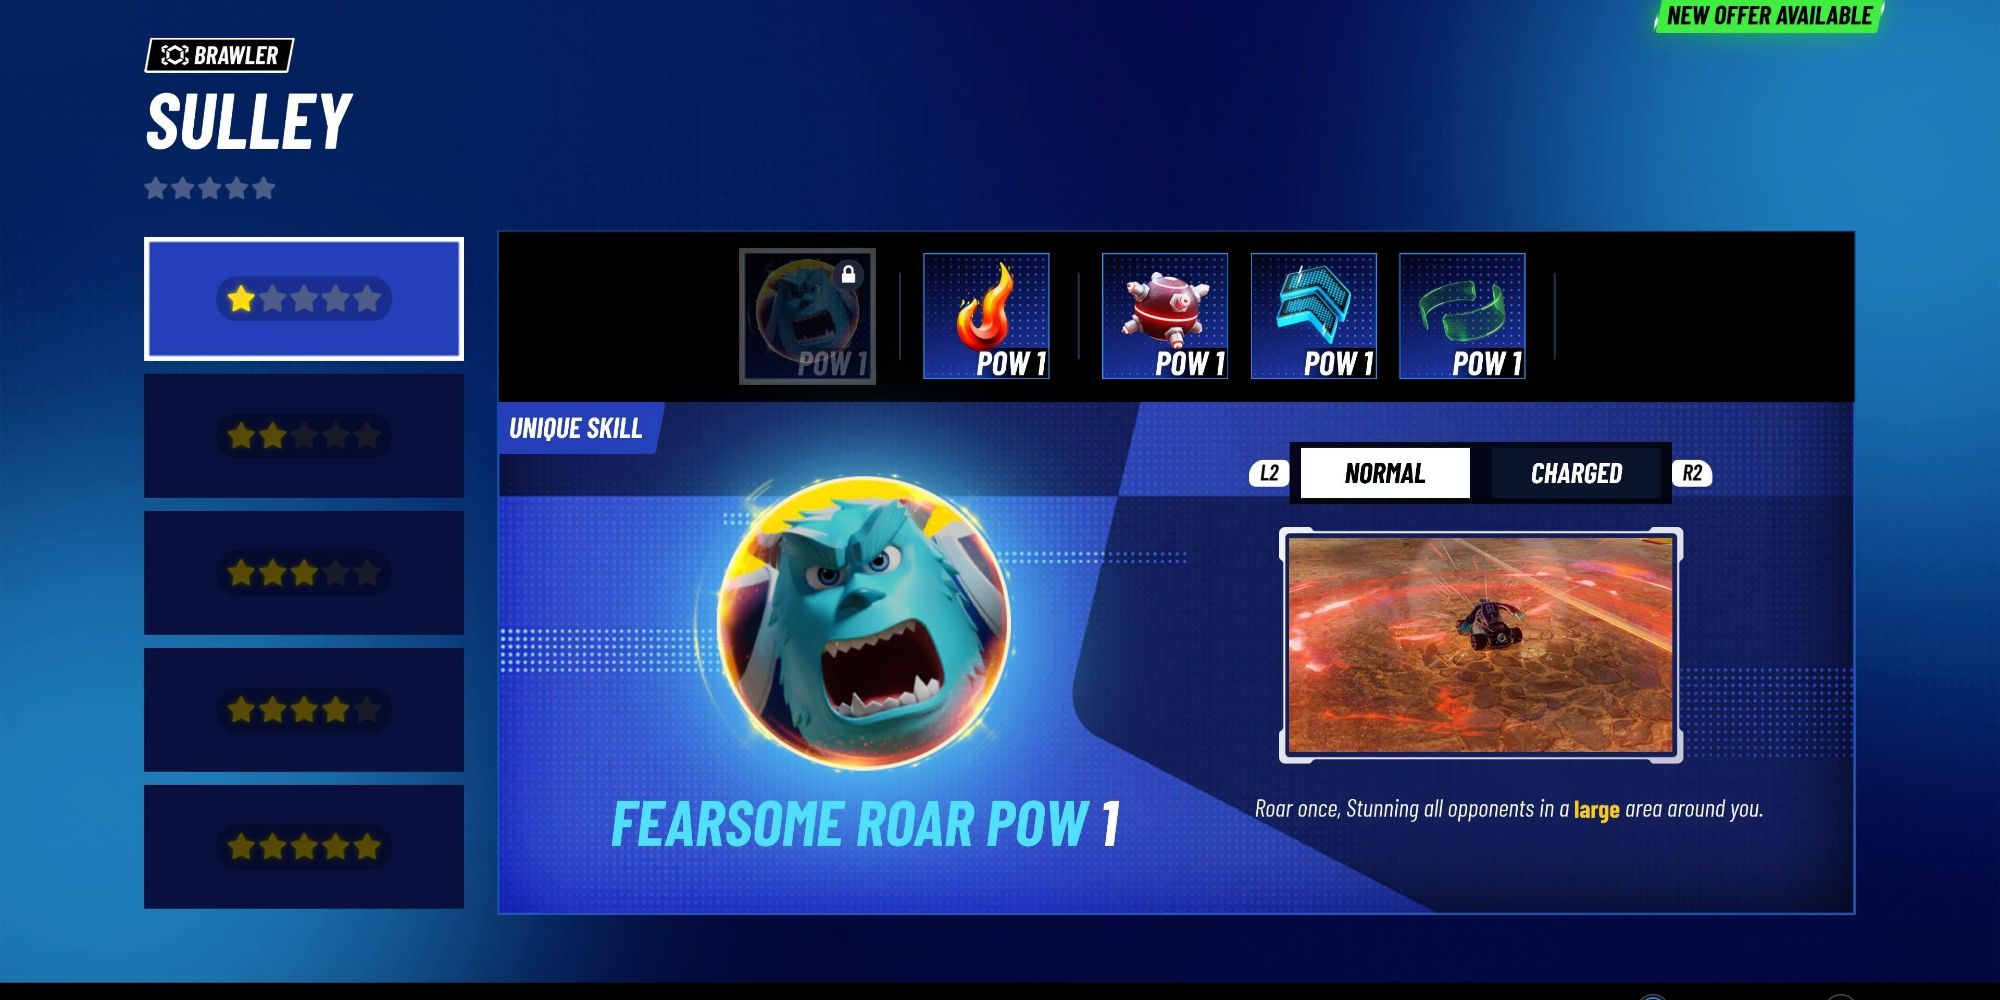 Sulley's unique skill in Disney Speedstorm, known as The Terrifying Roar